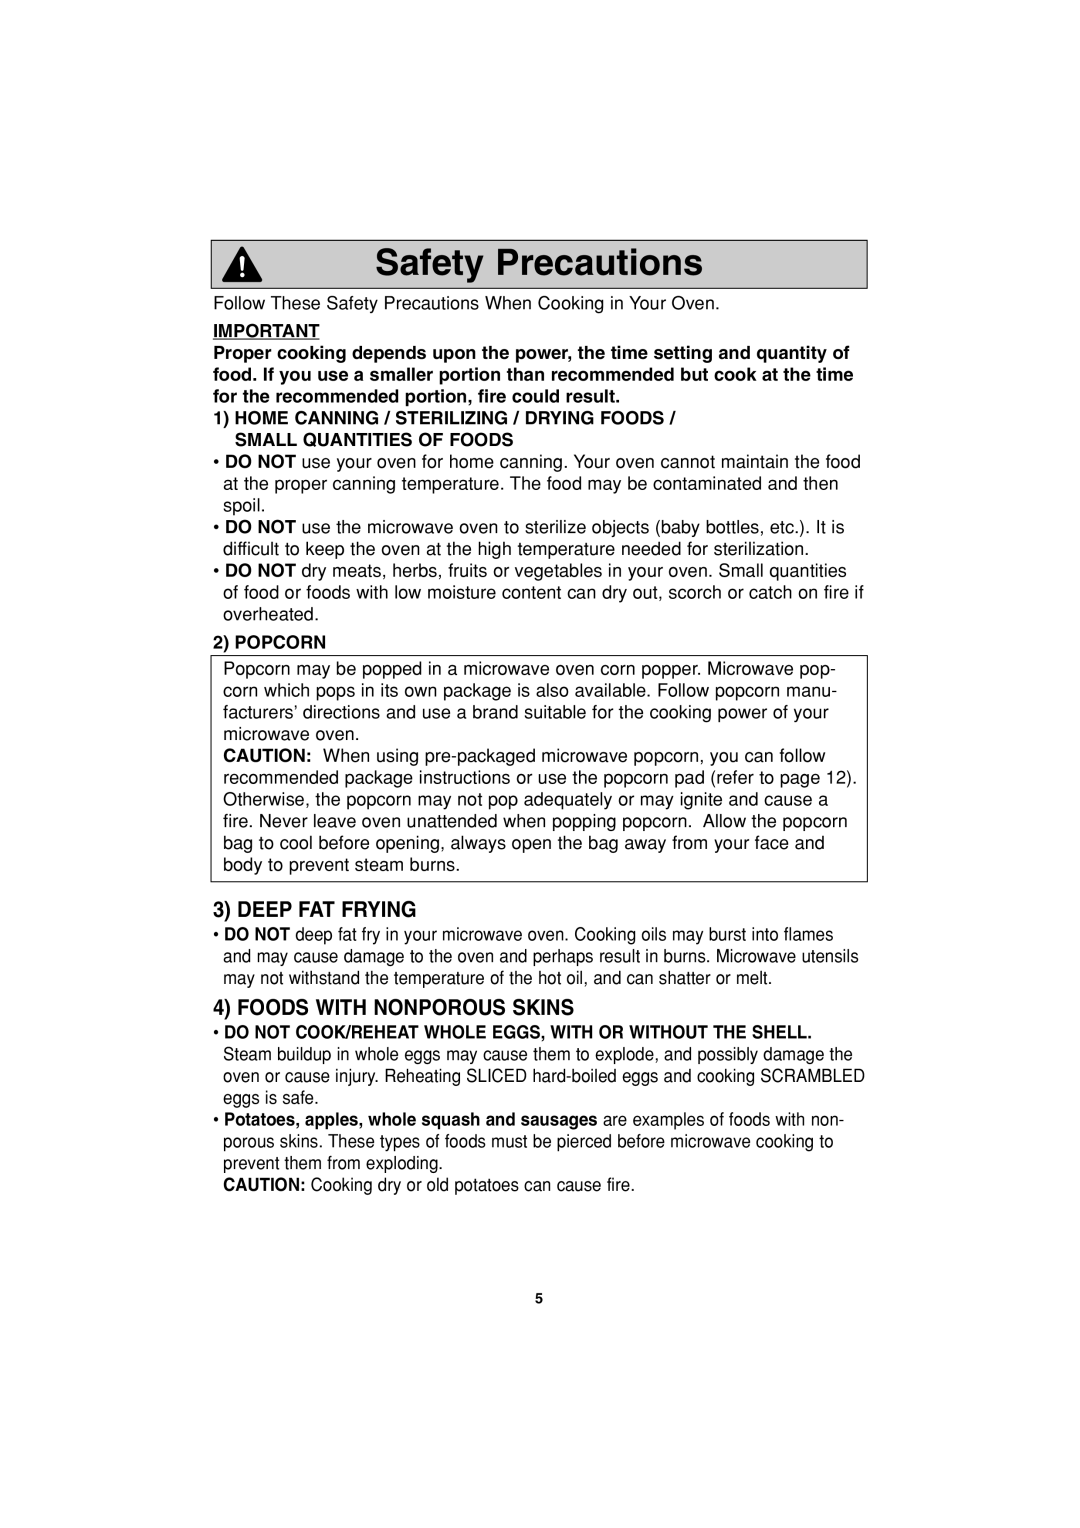 Panasonic NN-S953, NN-S753 operating instructions Safety Precautions, Deep Fat Frying, Foods With Nonporous Skins 